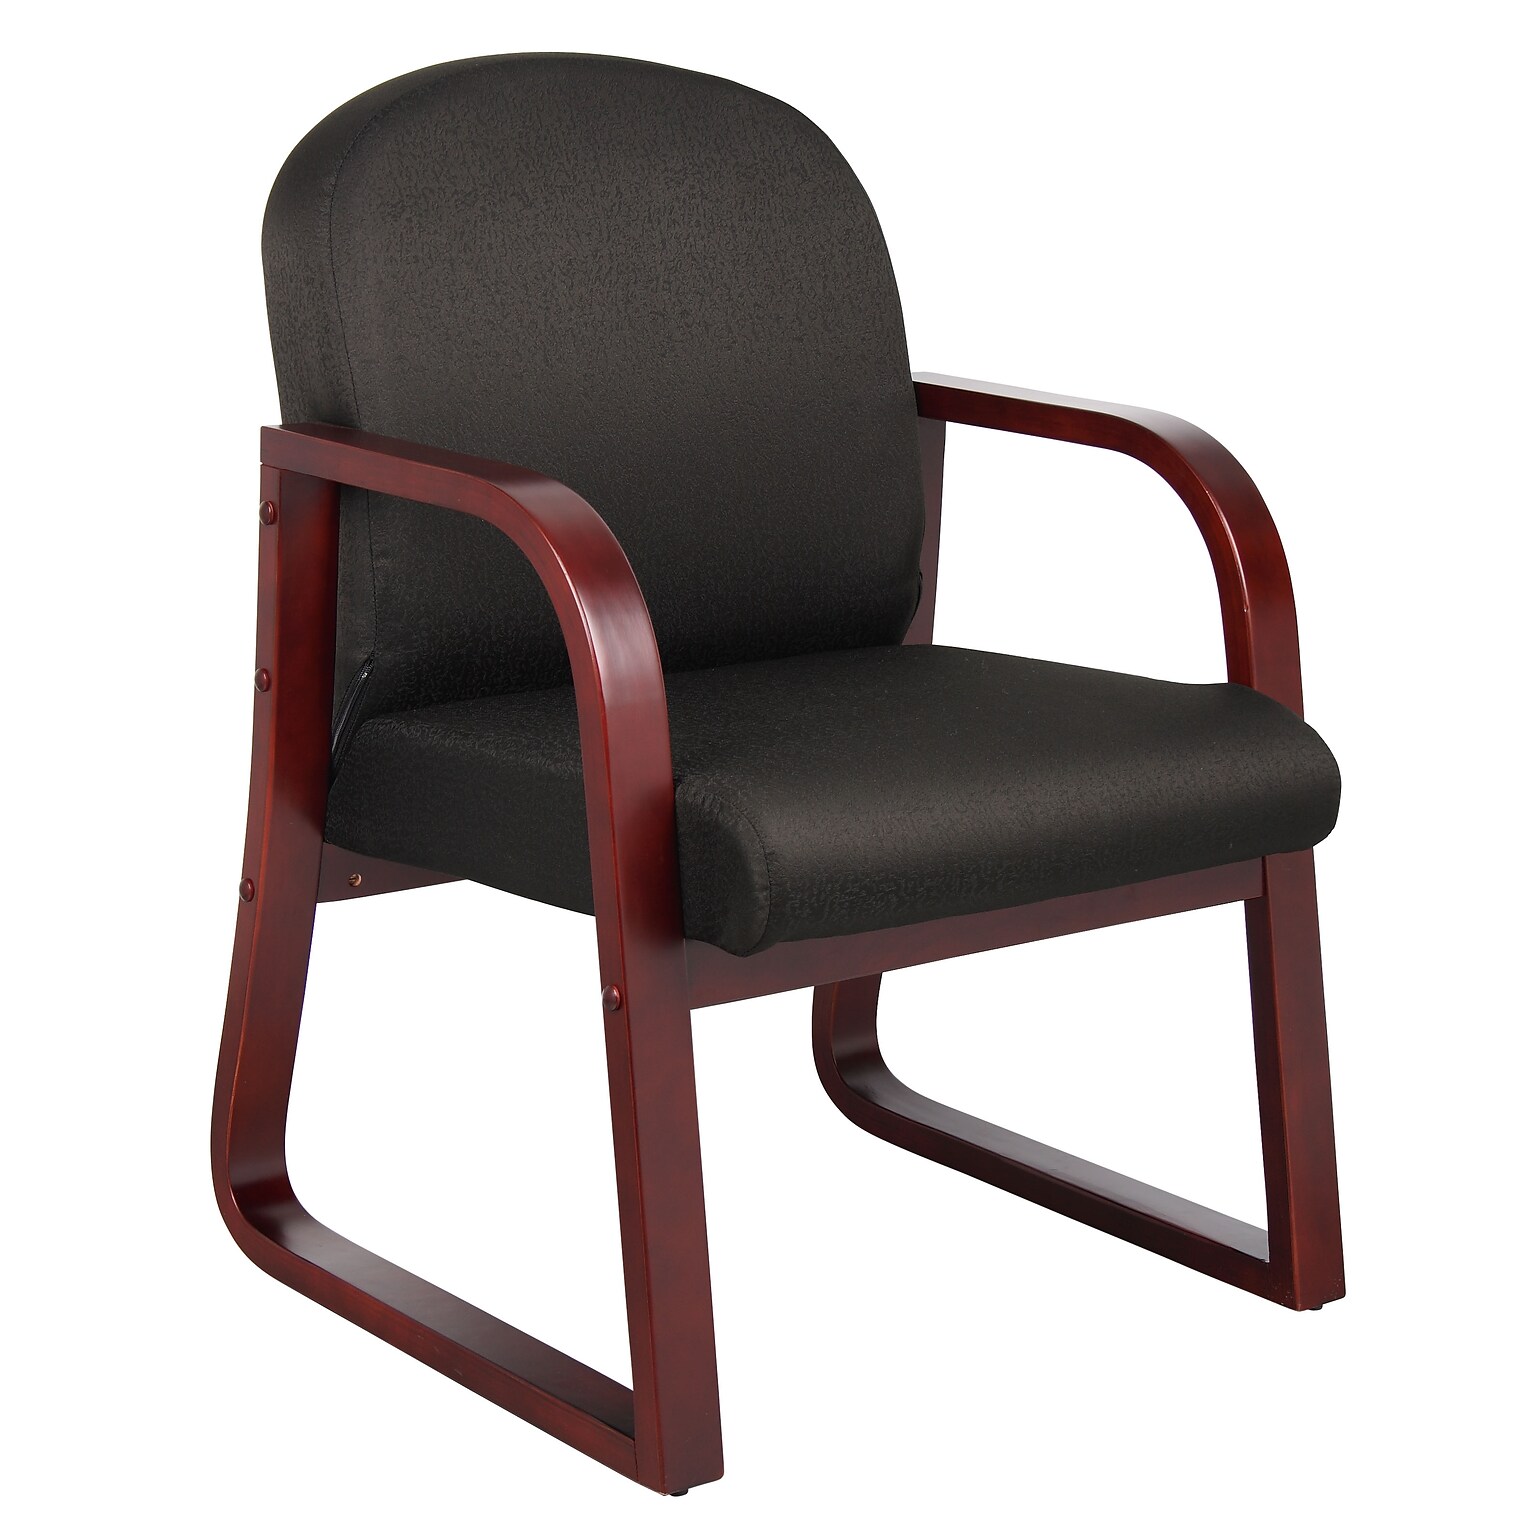 Lincolnshire Seating B9570 Series Mahogany Frame Guest Armchair; Black